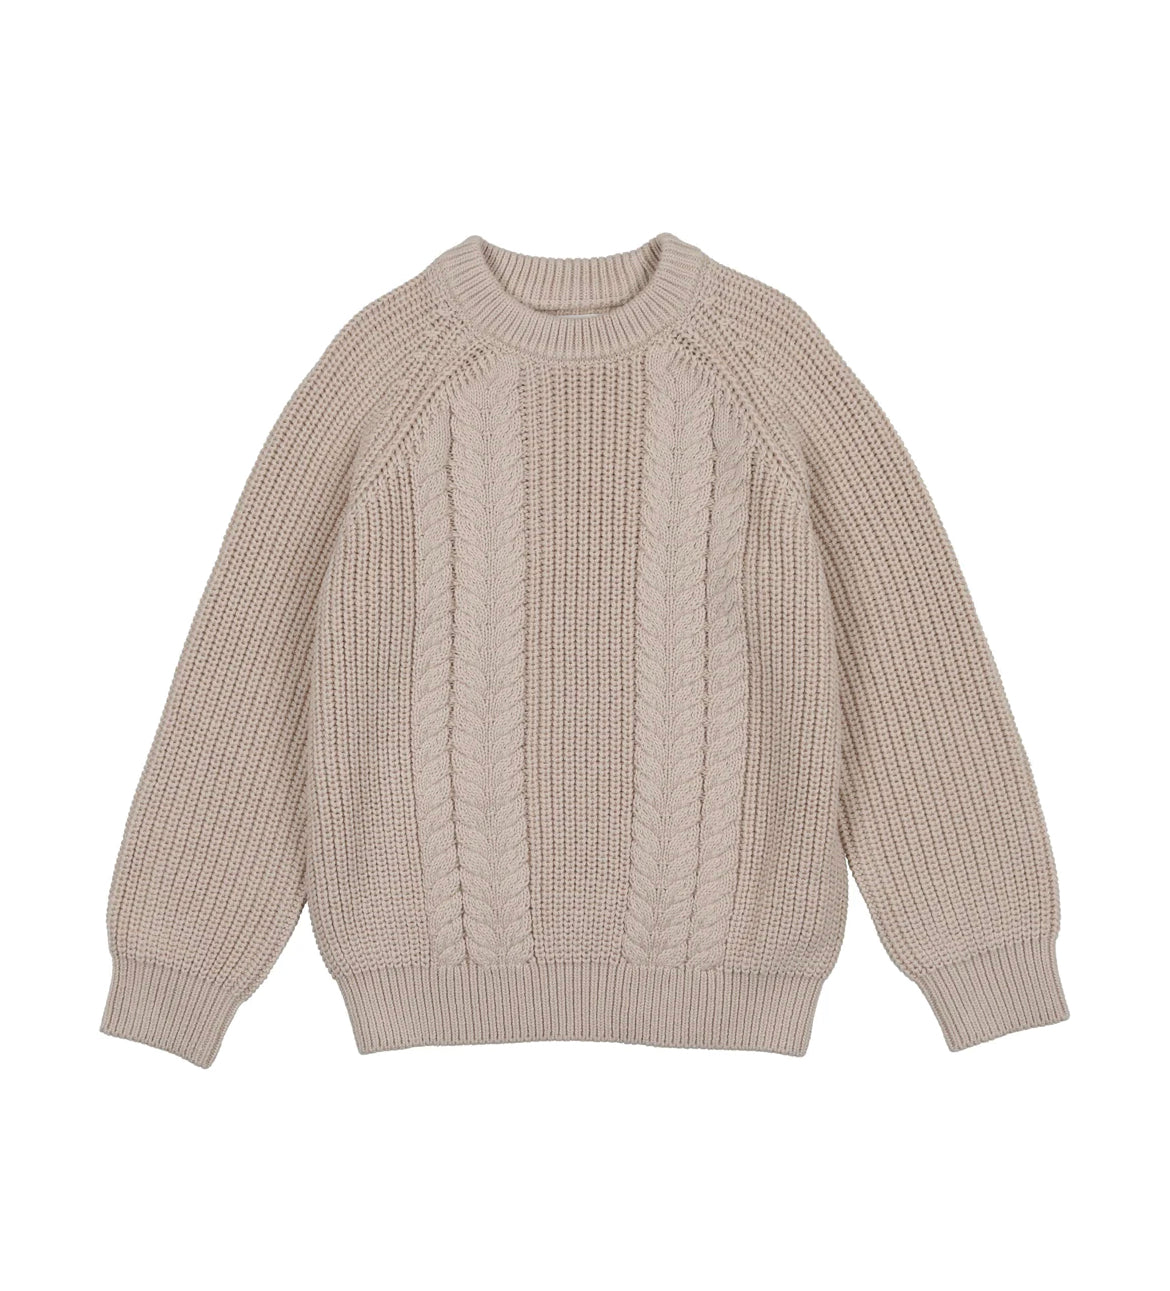 Coco Blanc Cream Cable Knit Sweater – Panda and Cub